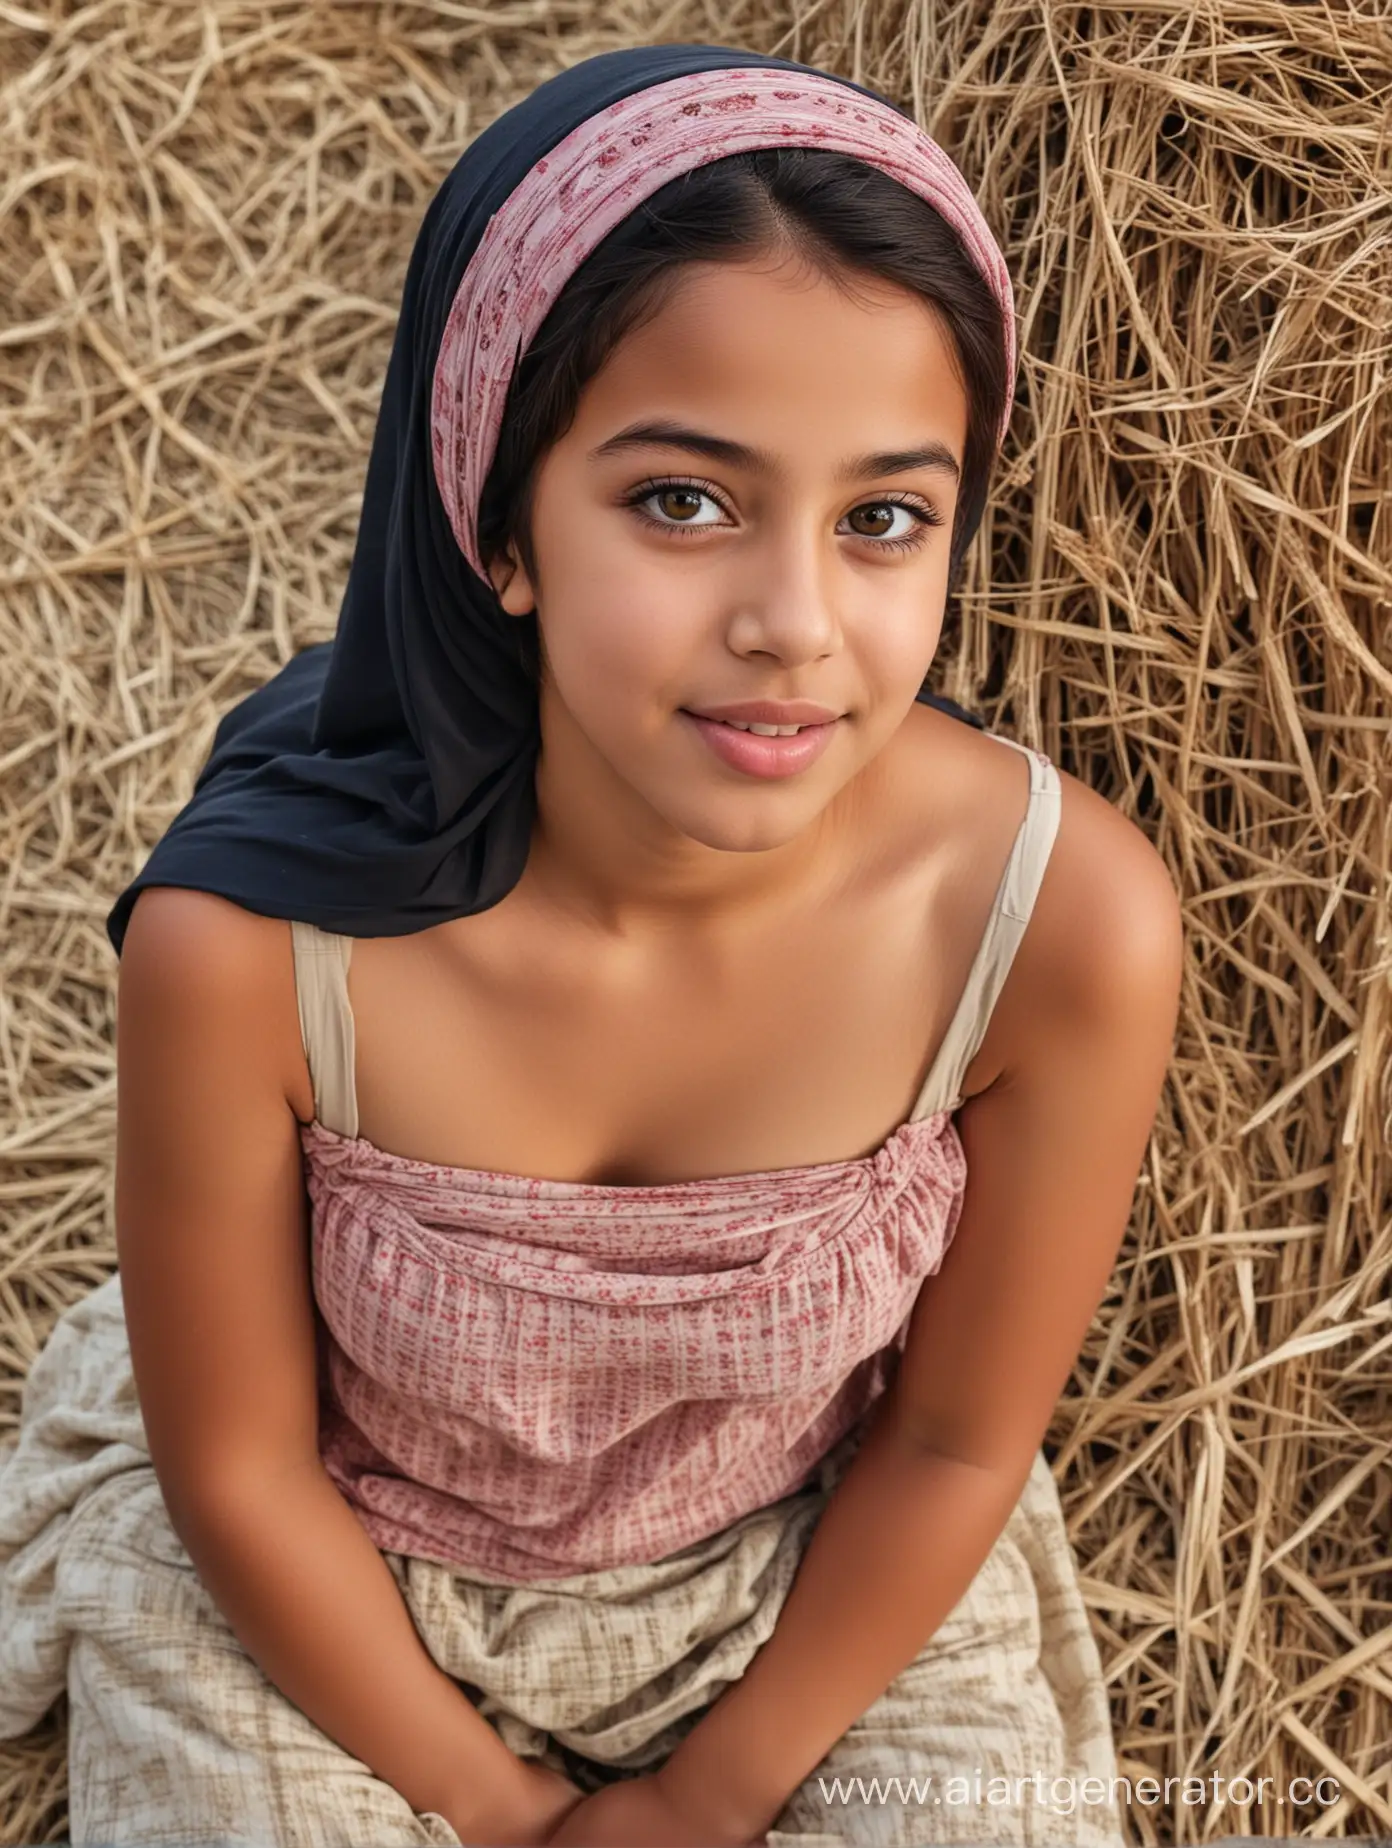 Egyptian-Girl-in-Traditional-Attire-with